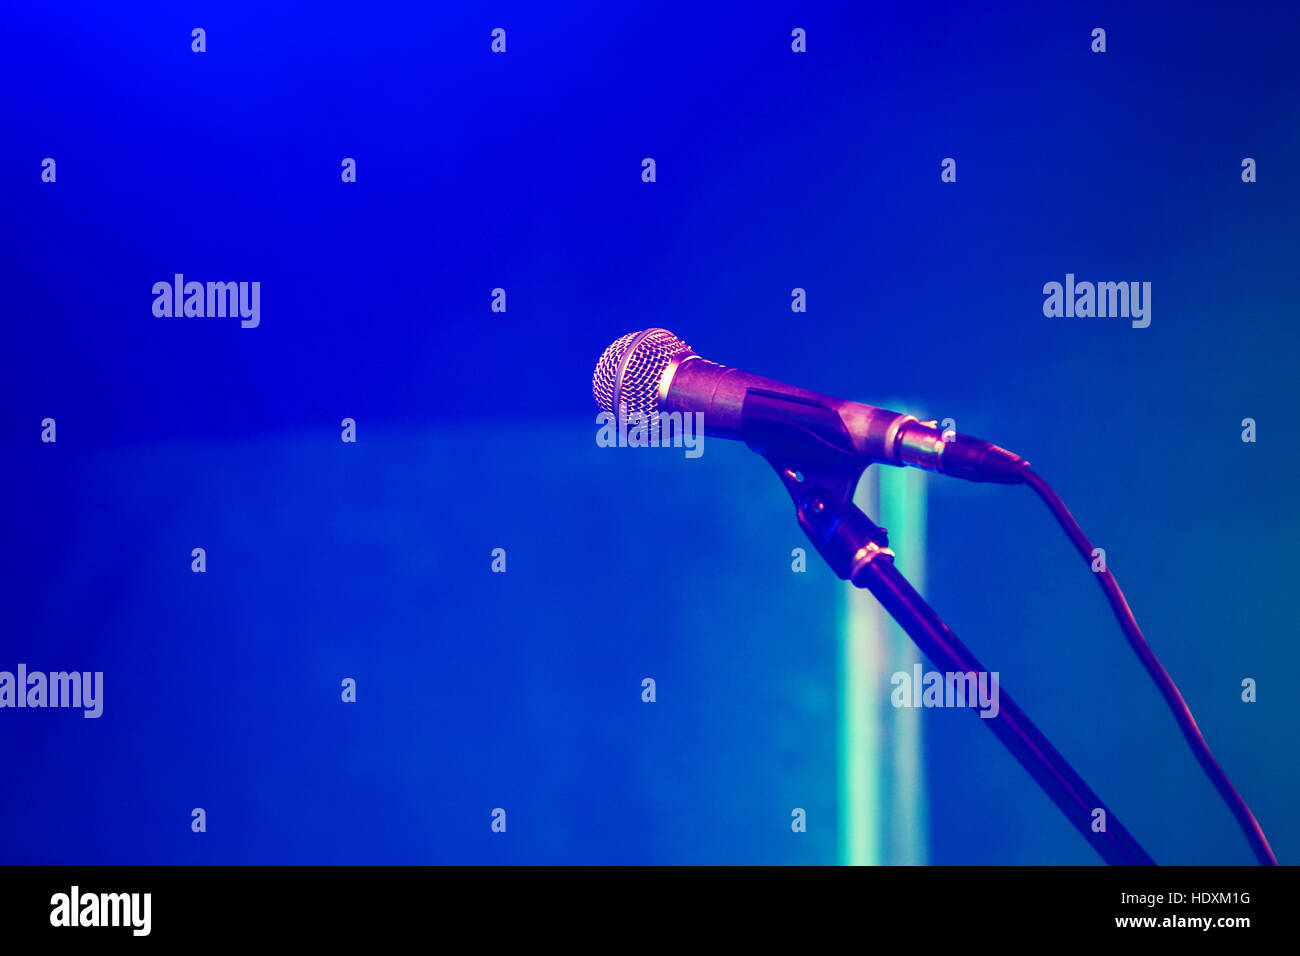 Professional stage microphone over blurred blue background Stock Photo